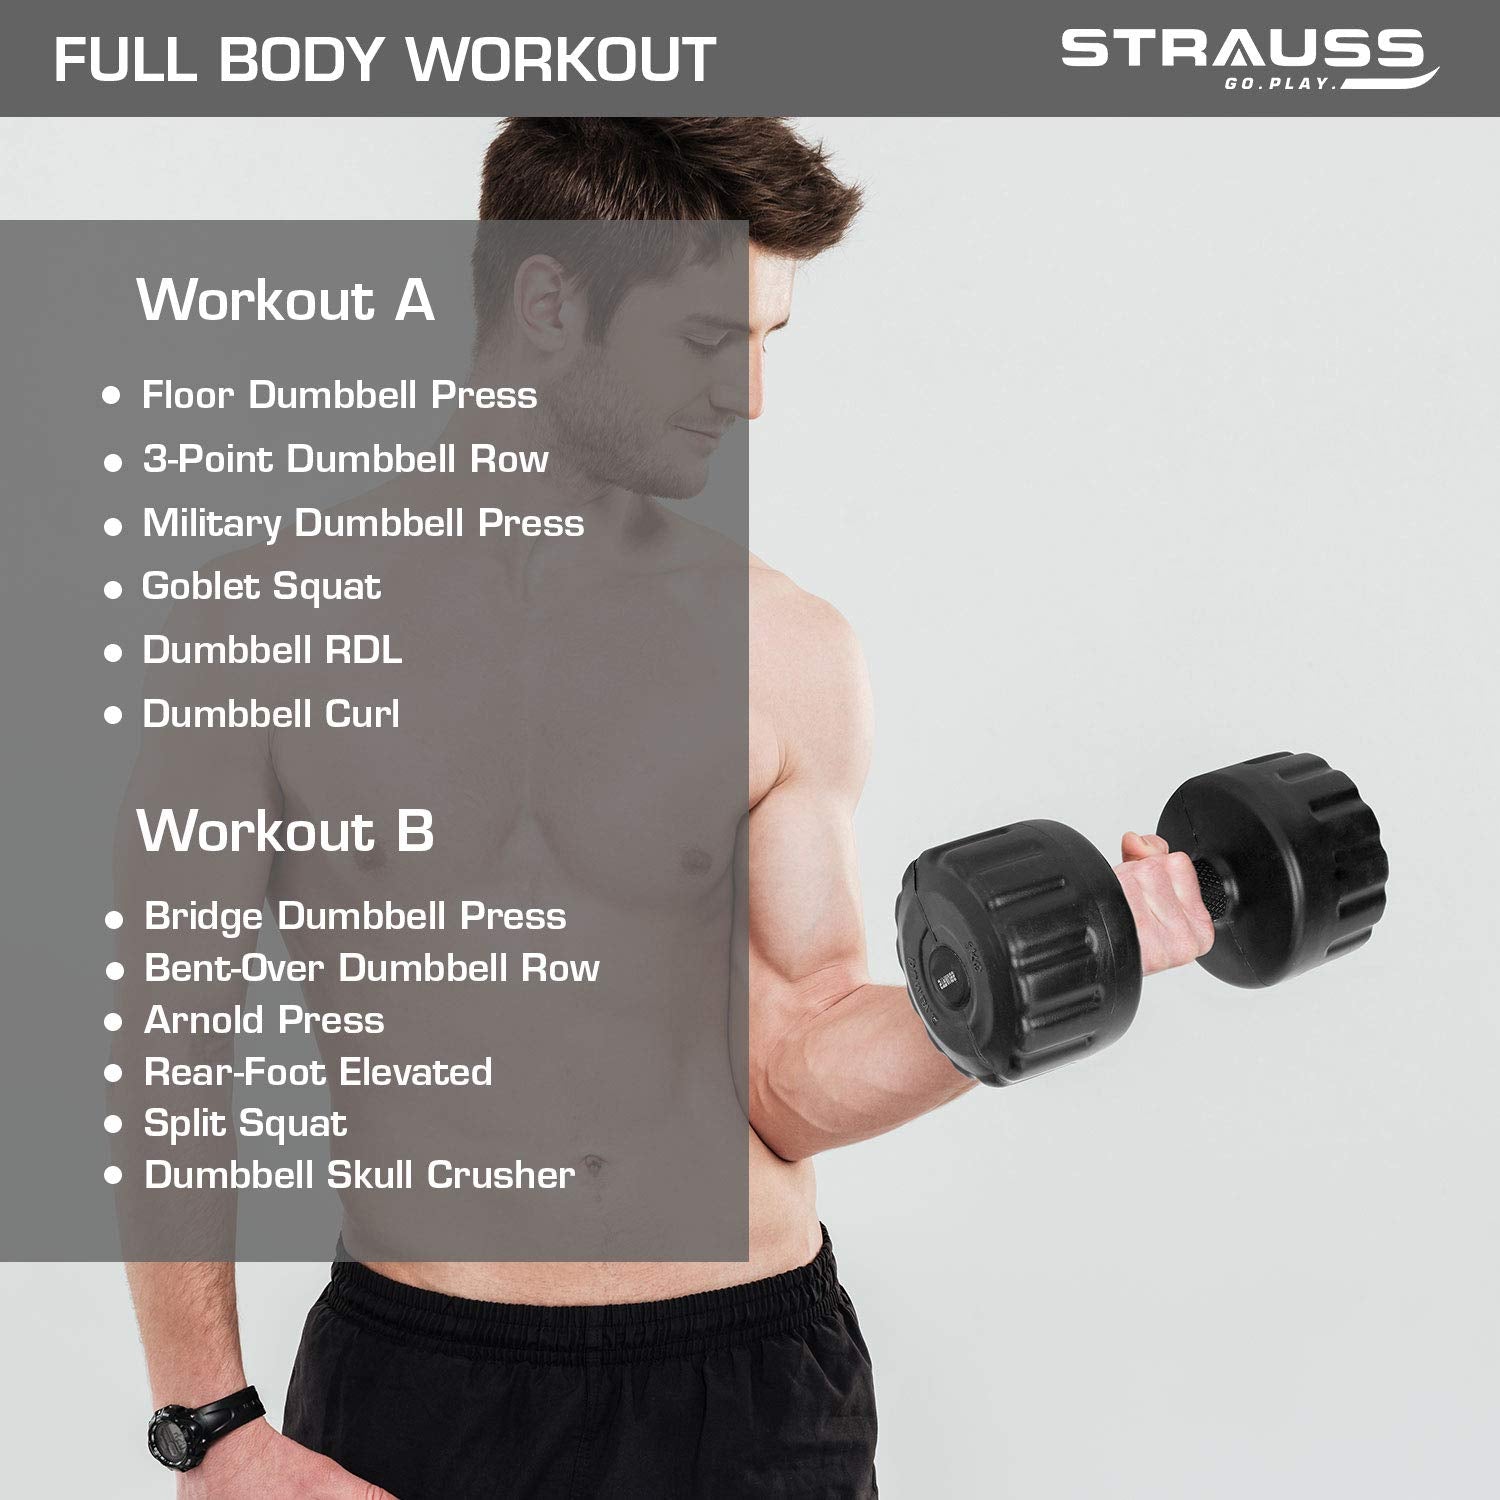 Strauss Unisex PVC Dumbbells Weight for Men & Women | 2Kg (Each)| 4Kg (Pair) | Ideal for Home Workout and Gym Exercises (Black)